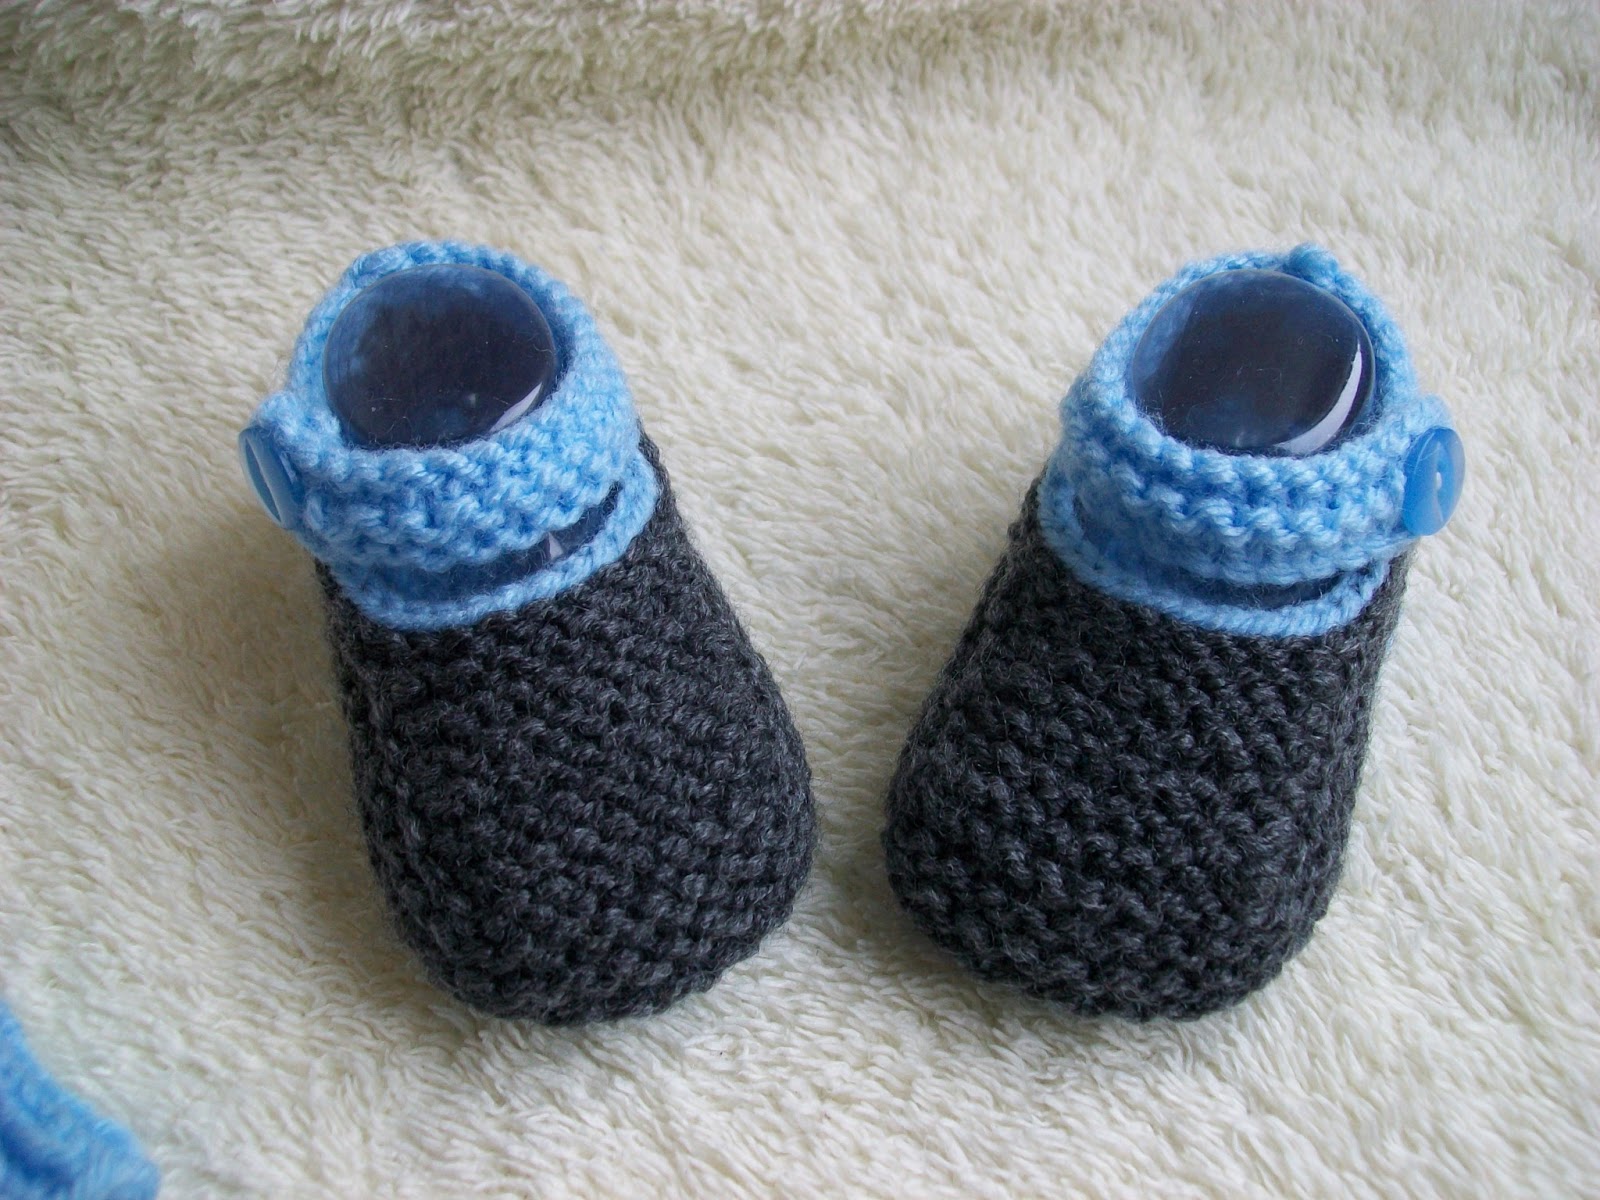 Free Patterns for Knitted Baby Booties 